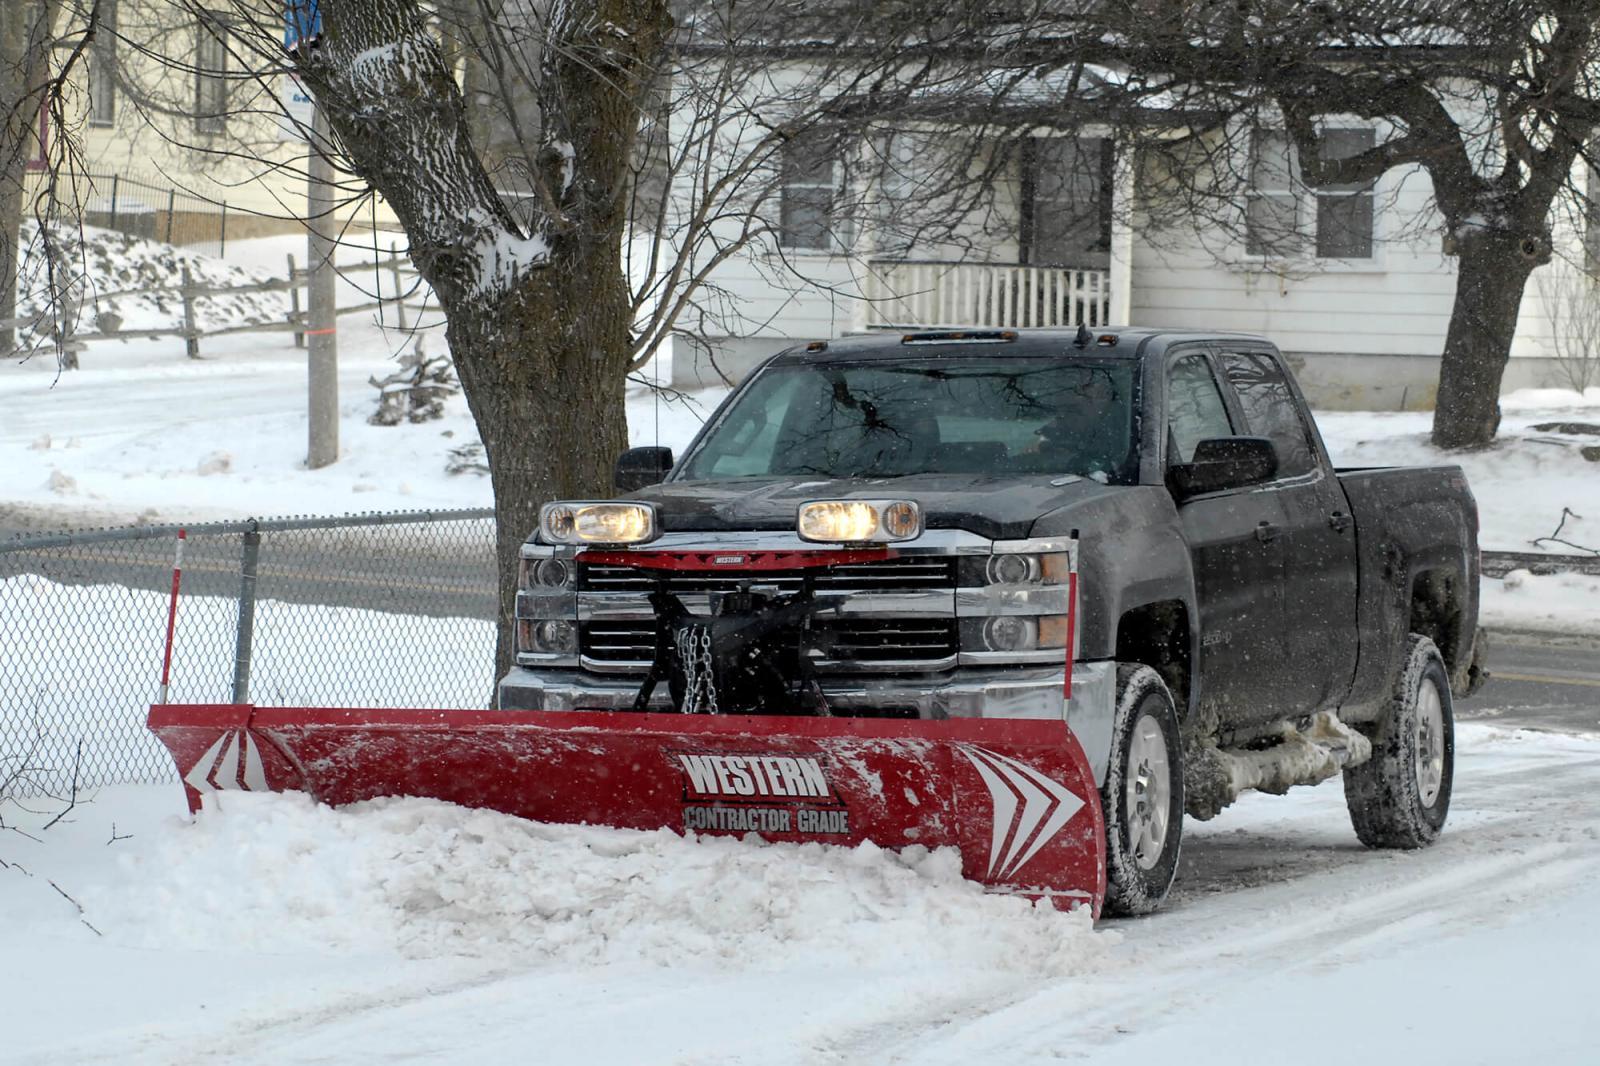 Ministry to blitz snow and ice contractors